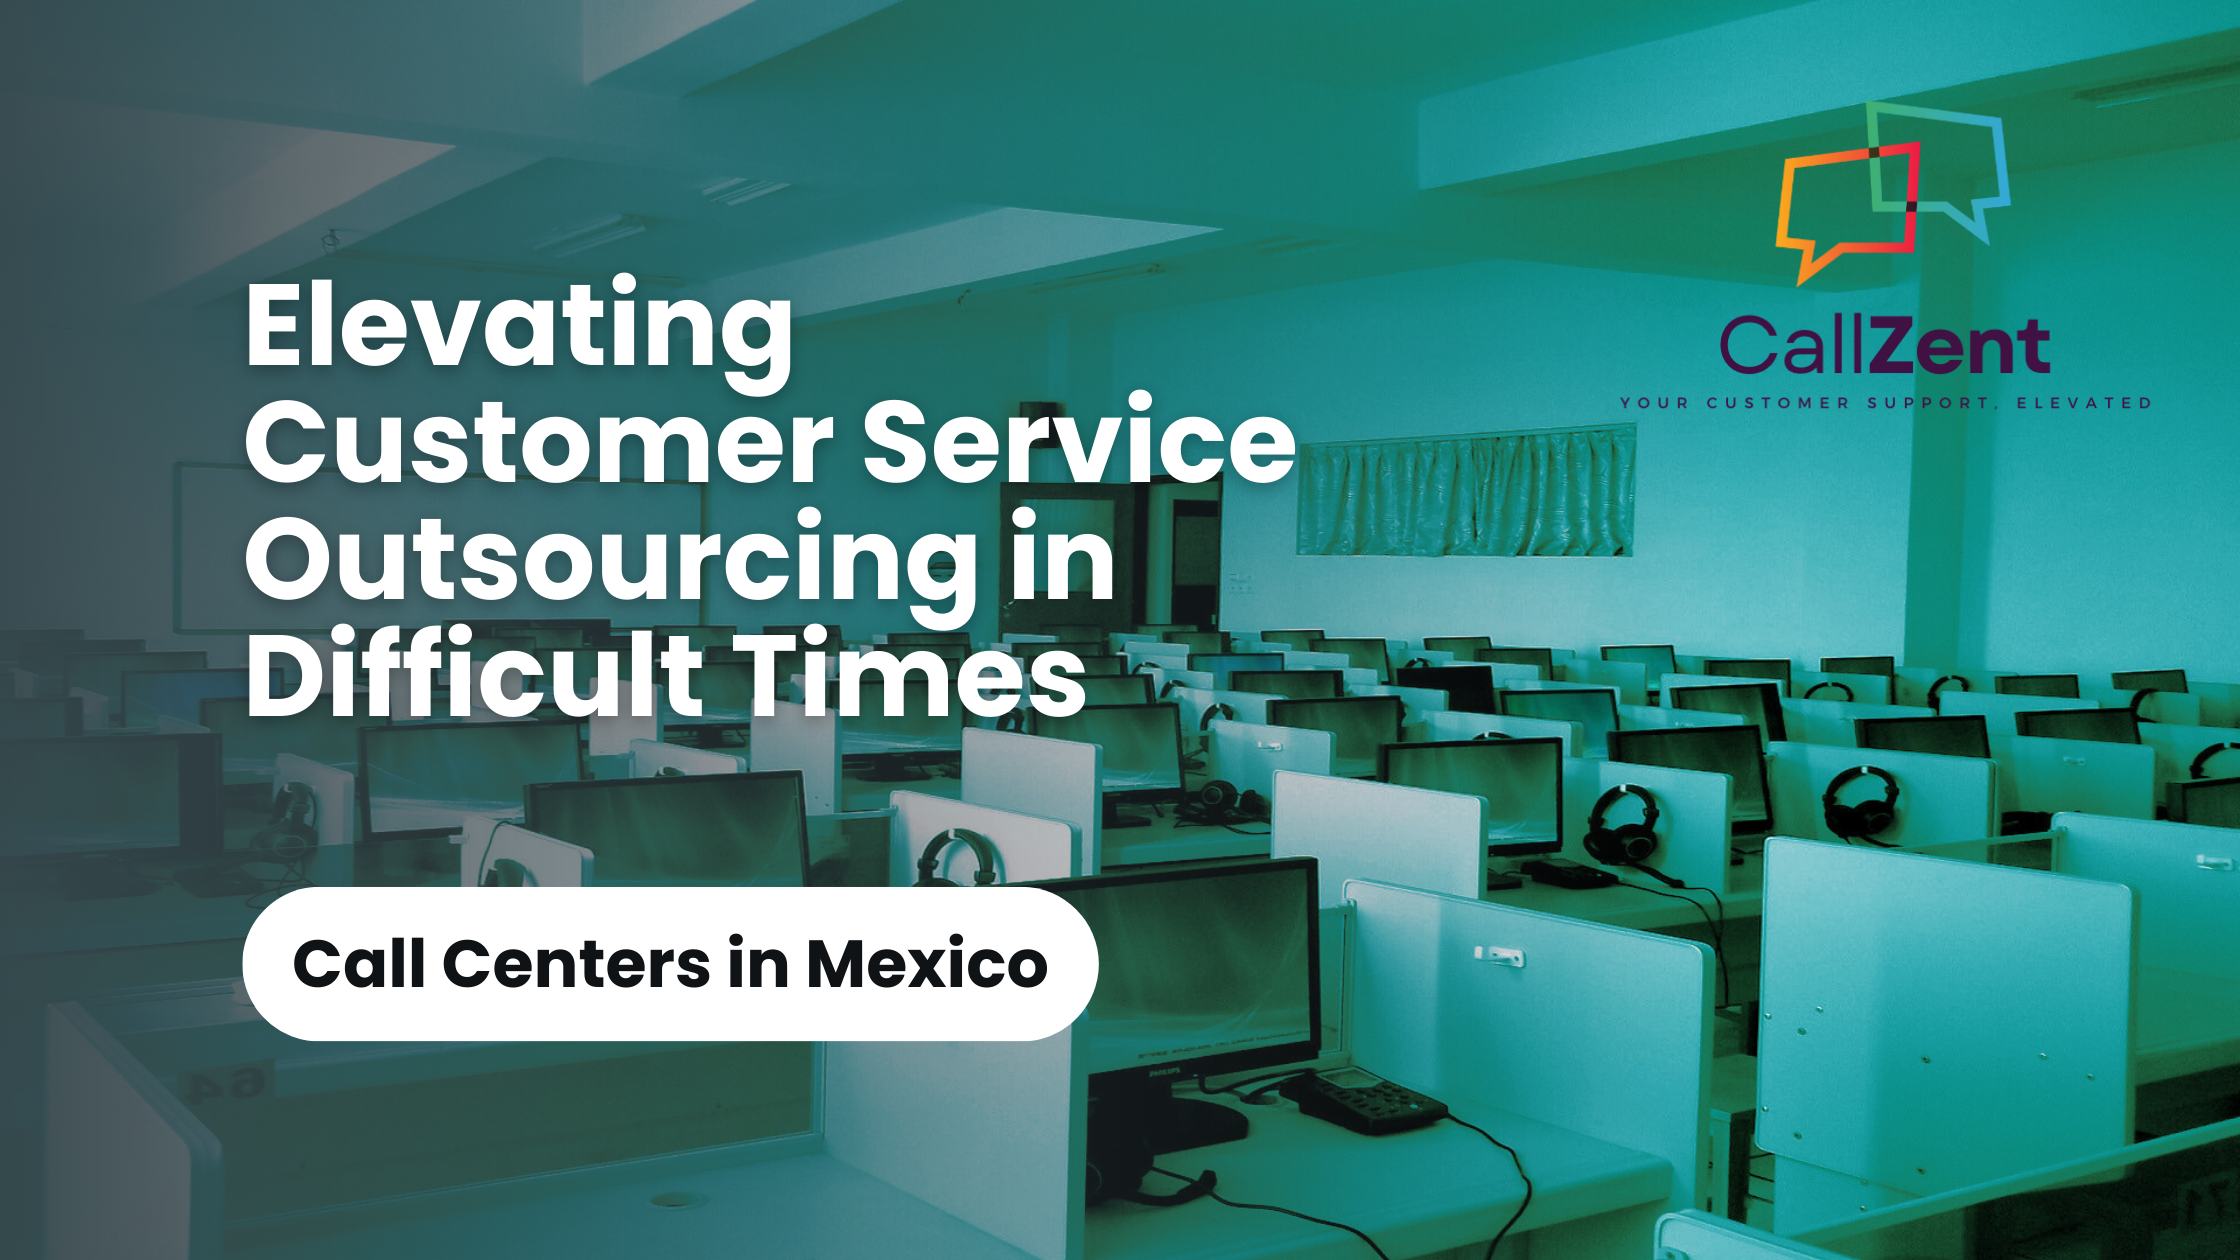 Call Centers In Mexico: Elevating Customer Service Outsourcing In Difficult Times